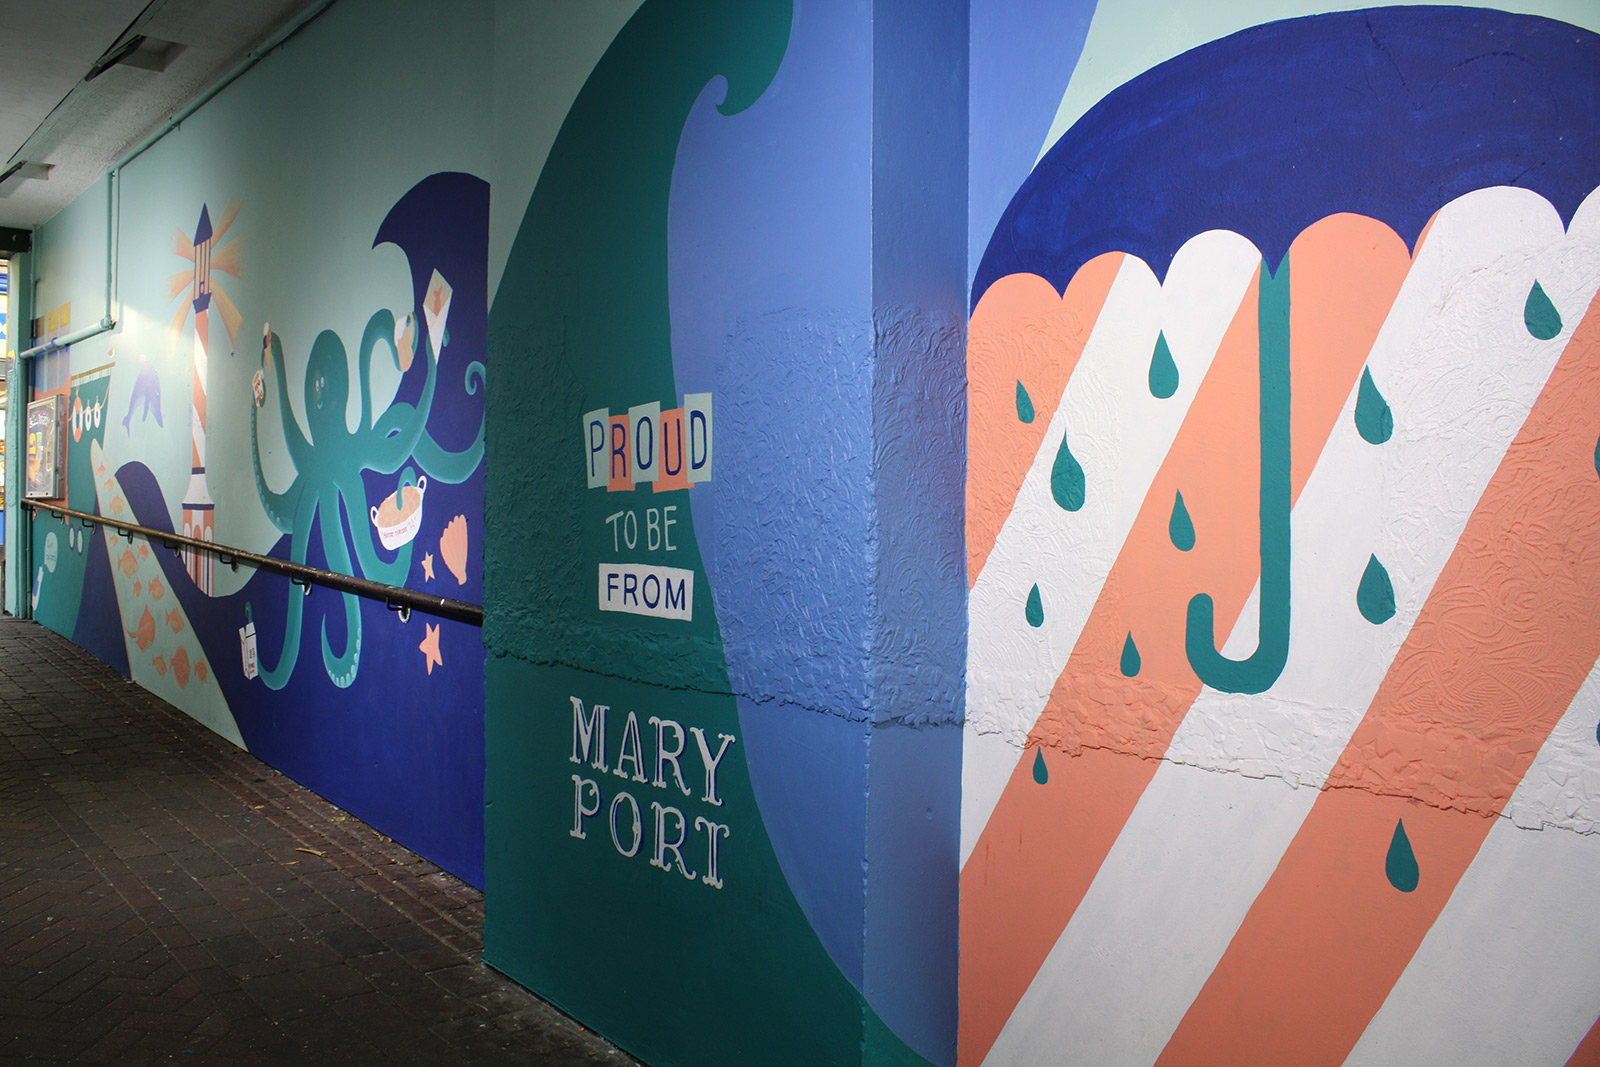 Young Maryport artists transform town centre with community arts project